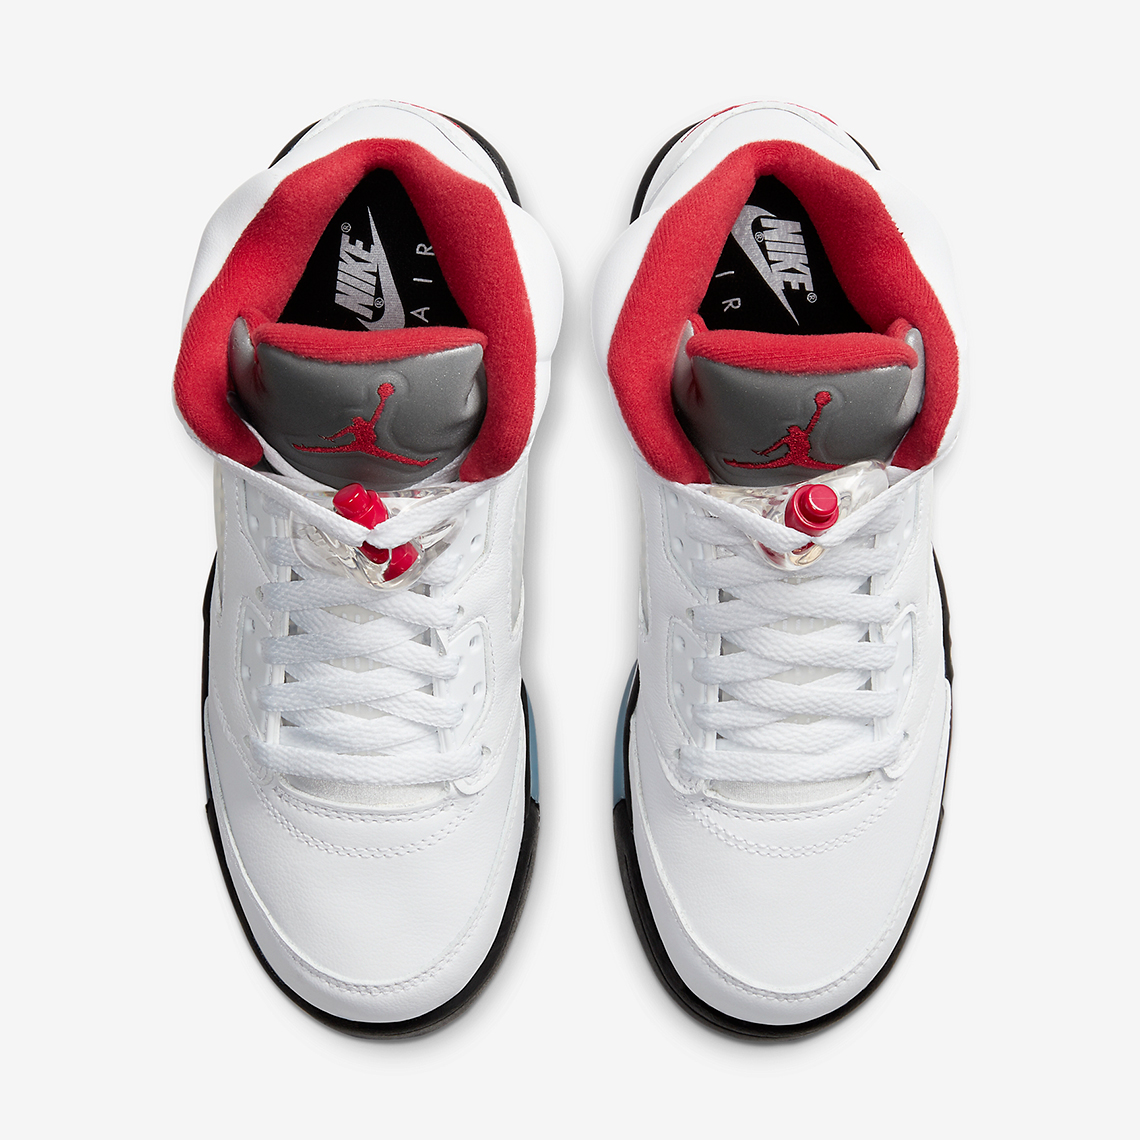 WINGS for the Jordan Brand 8×8 Collection Fire Red Kids 440888 102 5